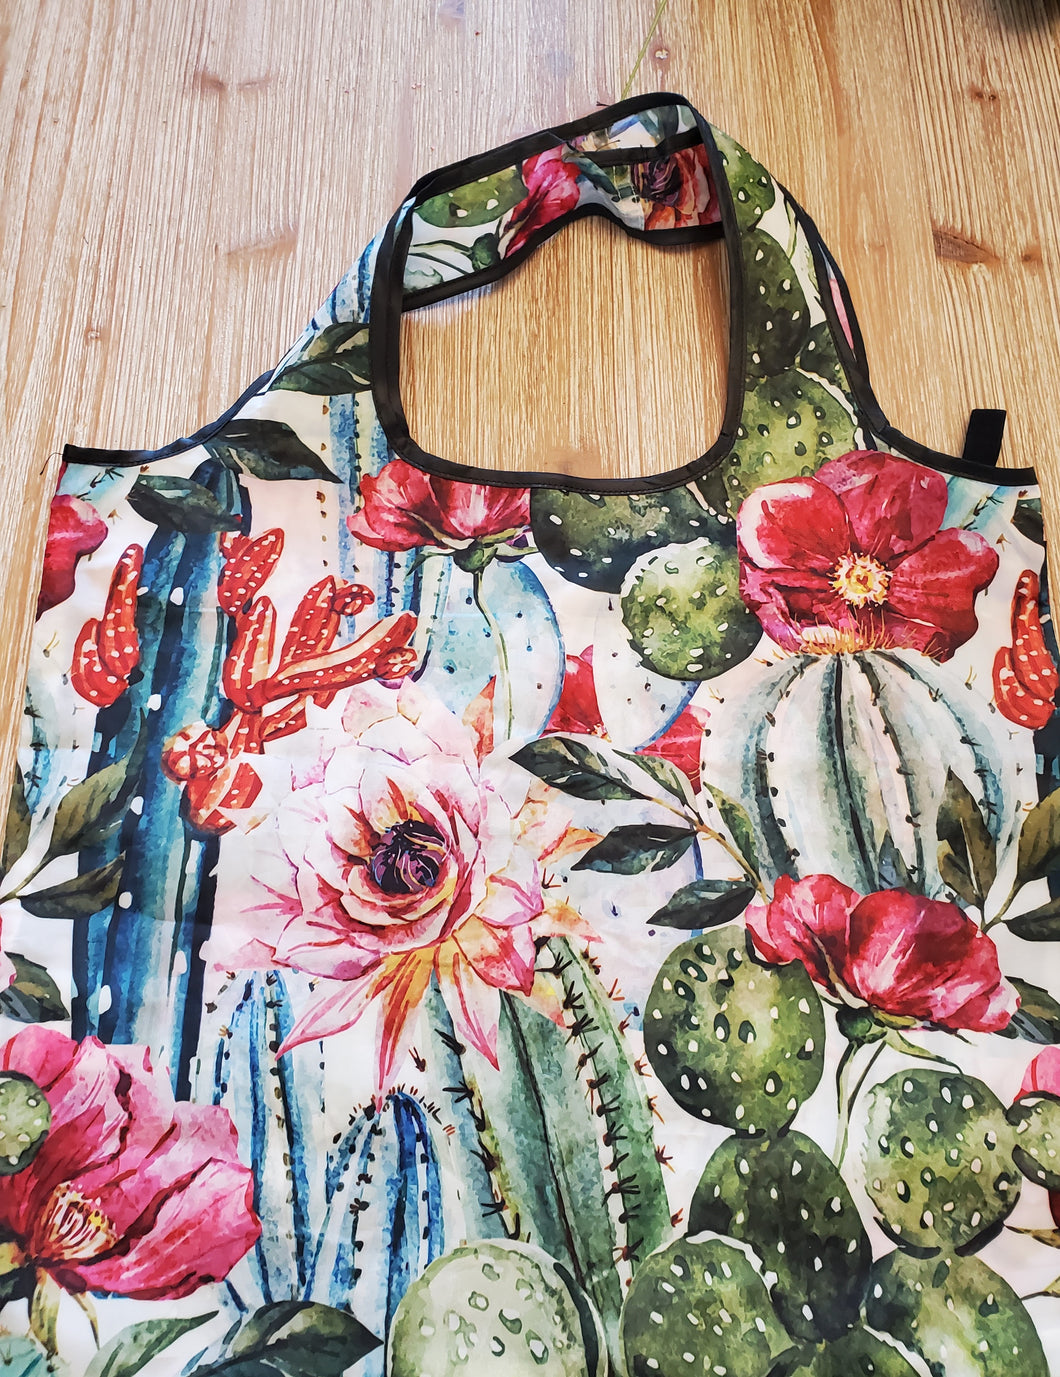 Cactus All Around double stitched artful tote bag